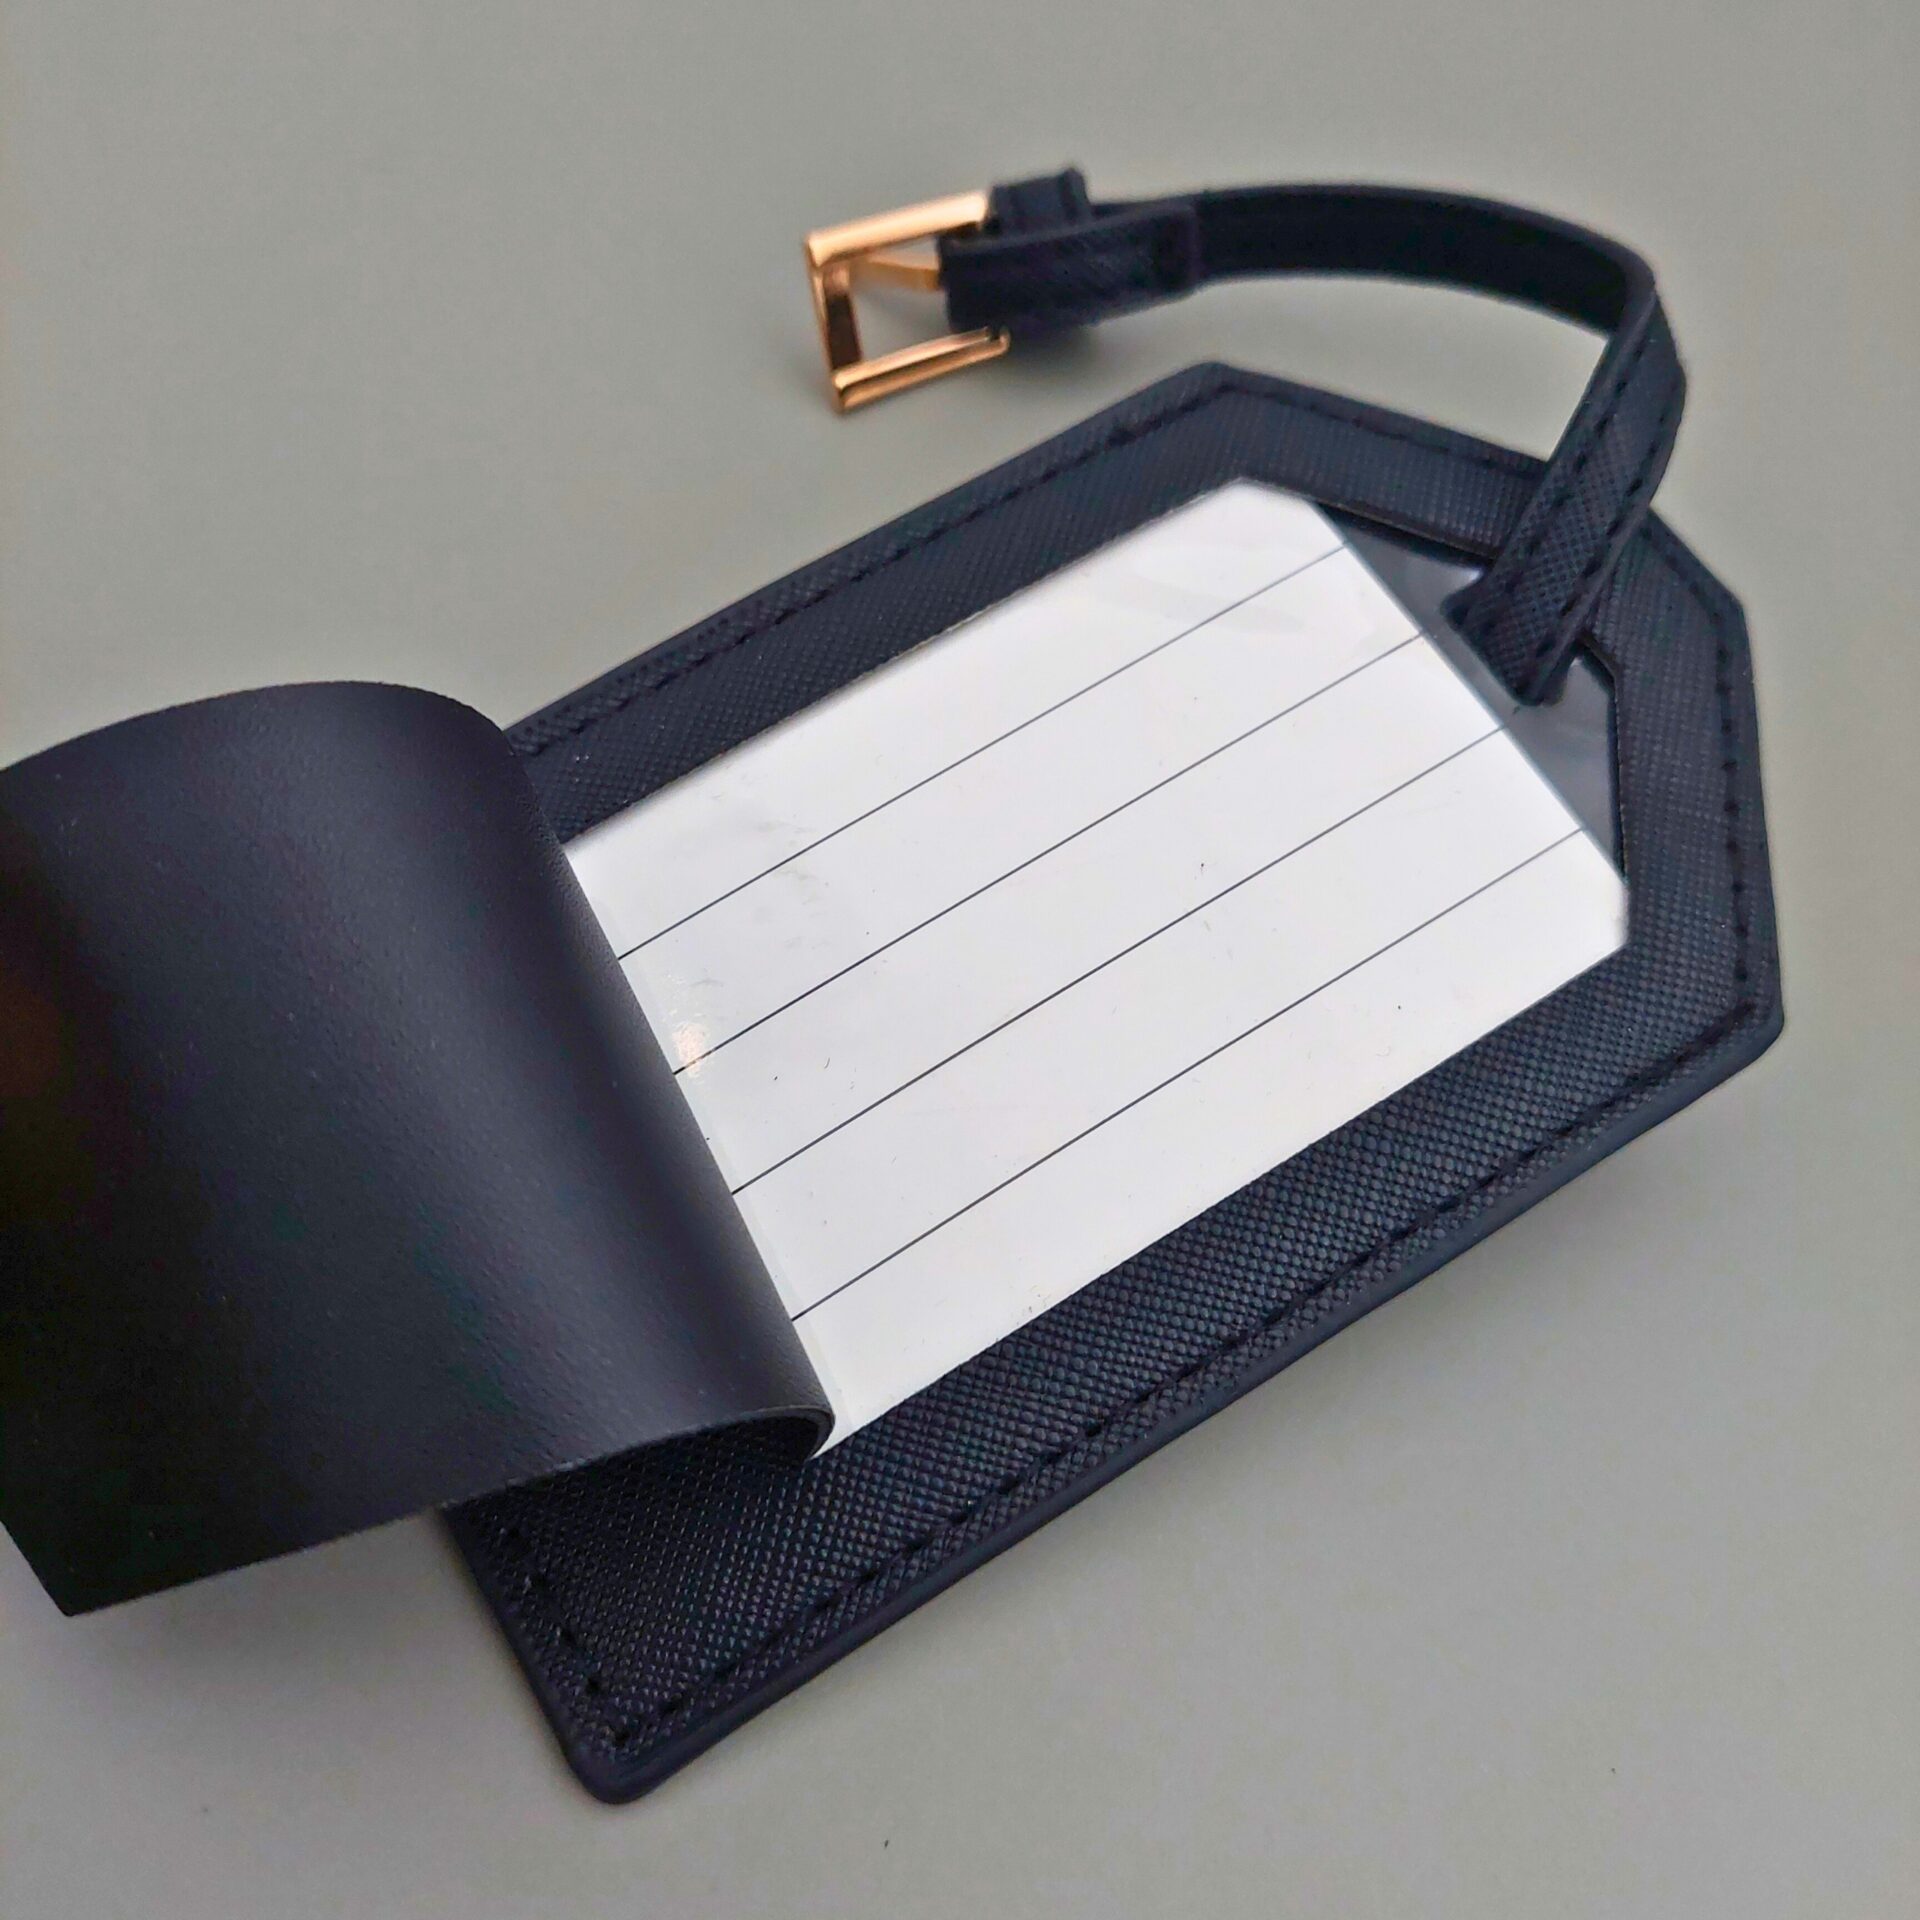 luggage tag corporate gift singapore leather odos interior contact